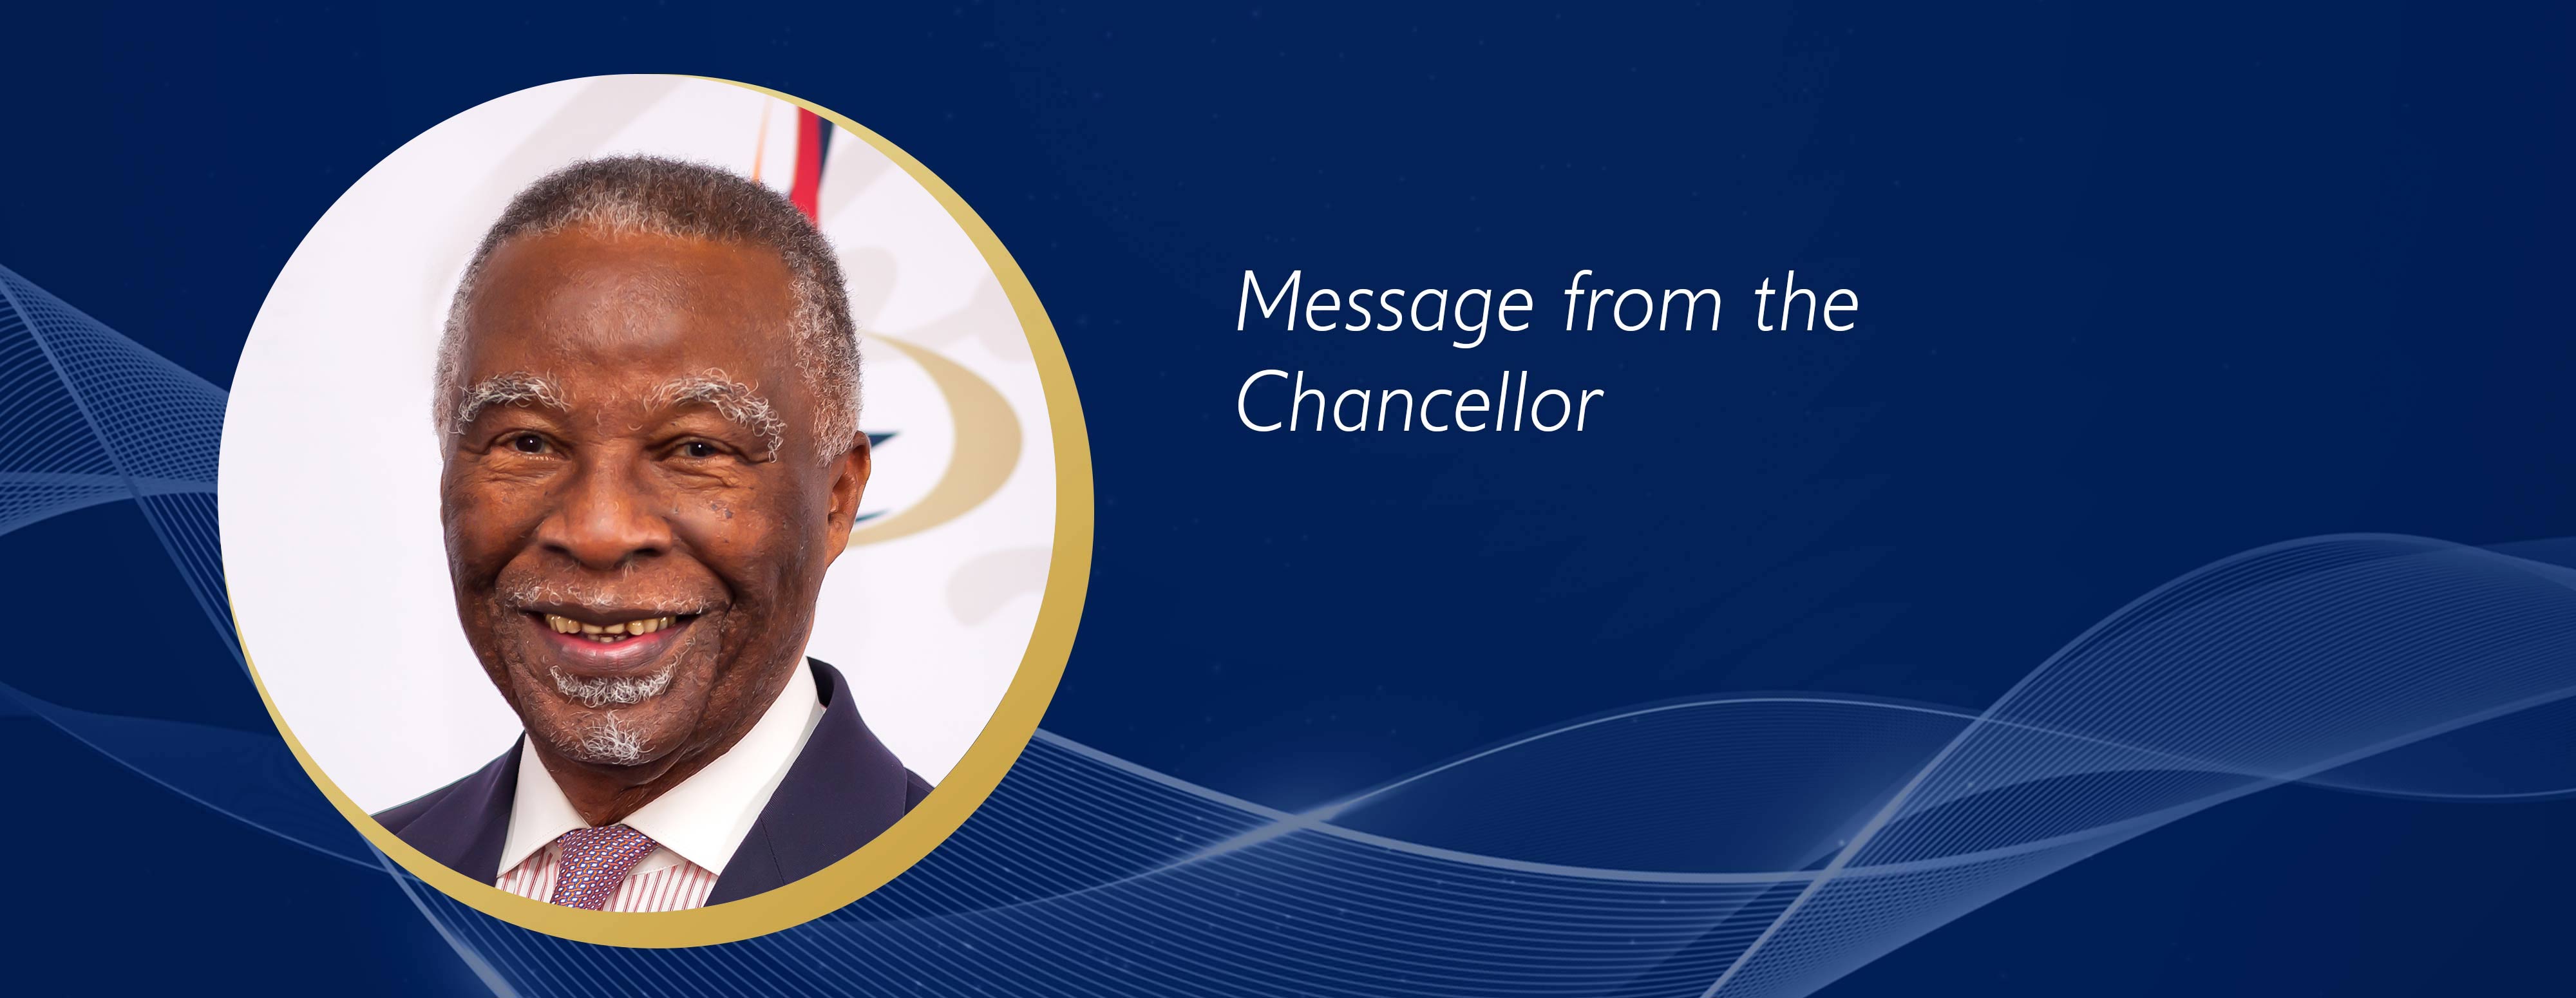 Message from the Chancellor